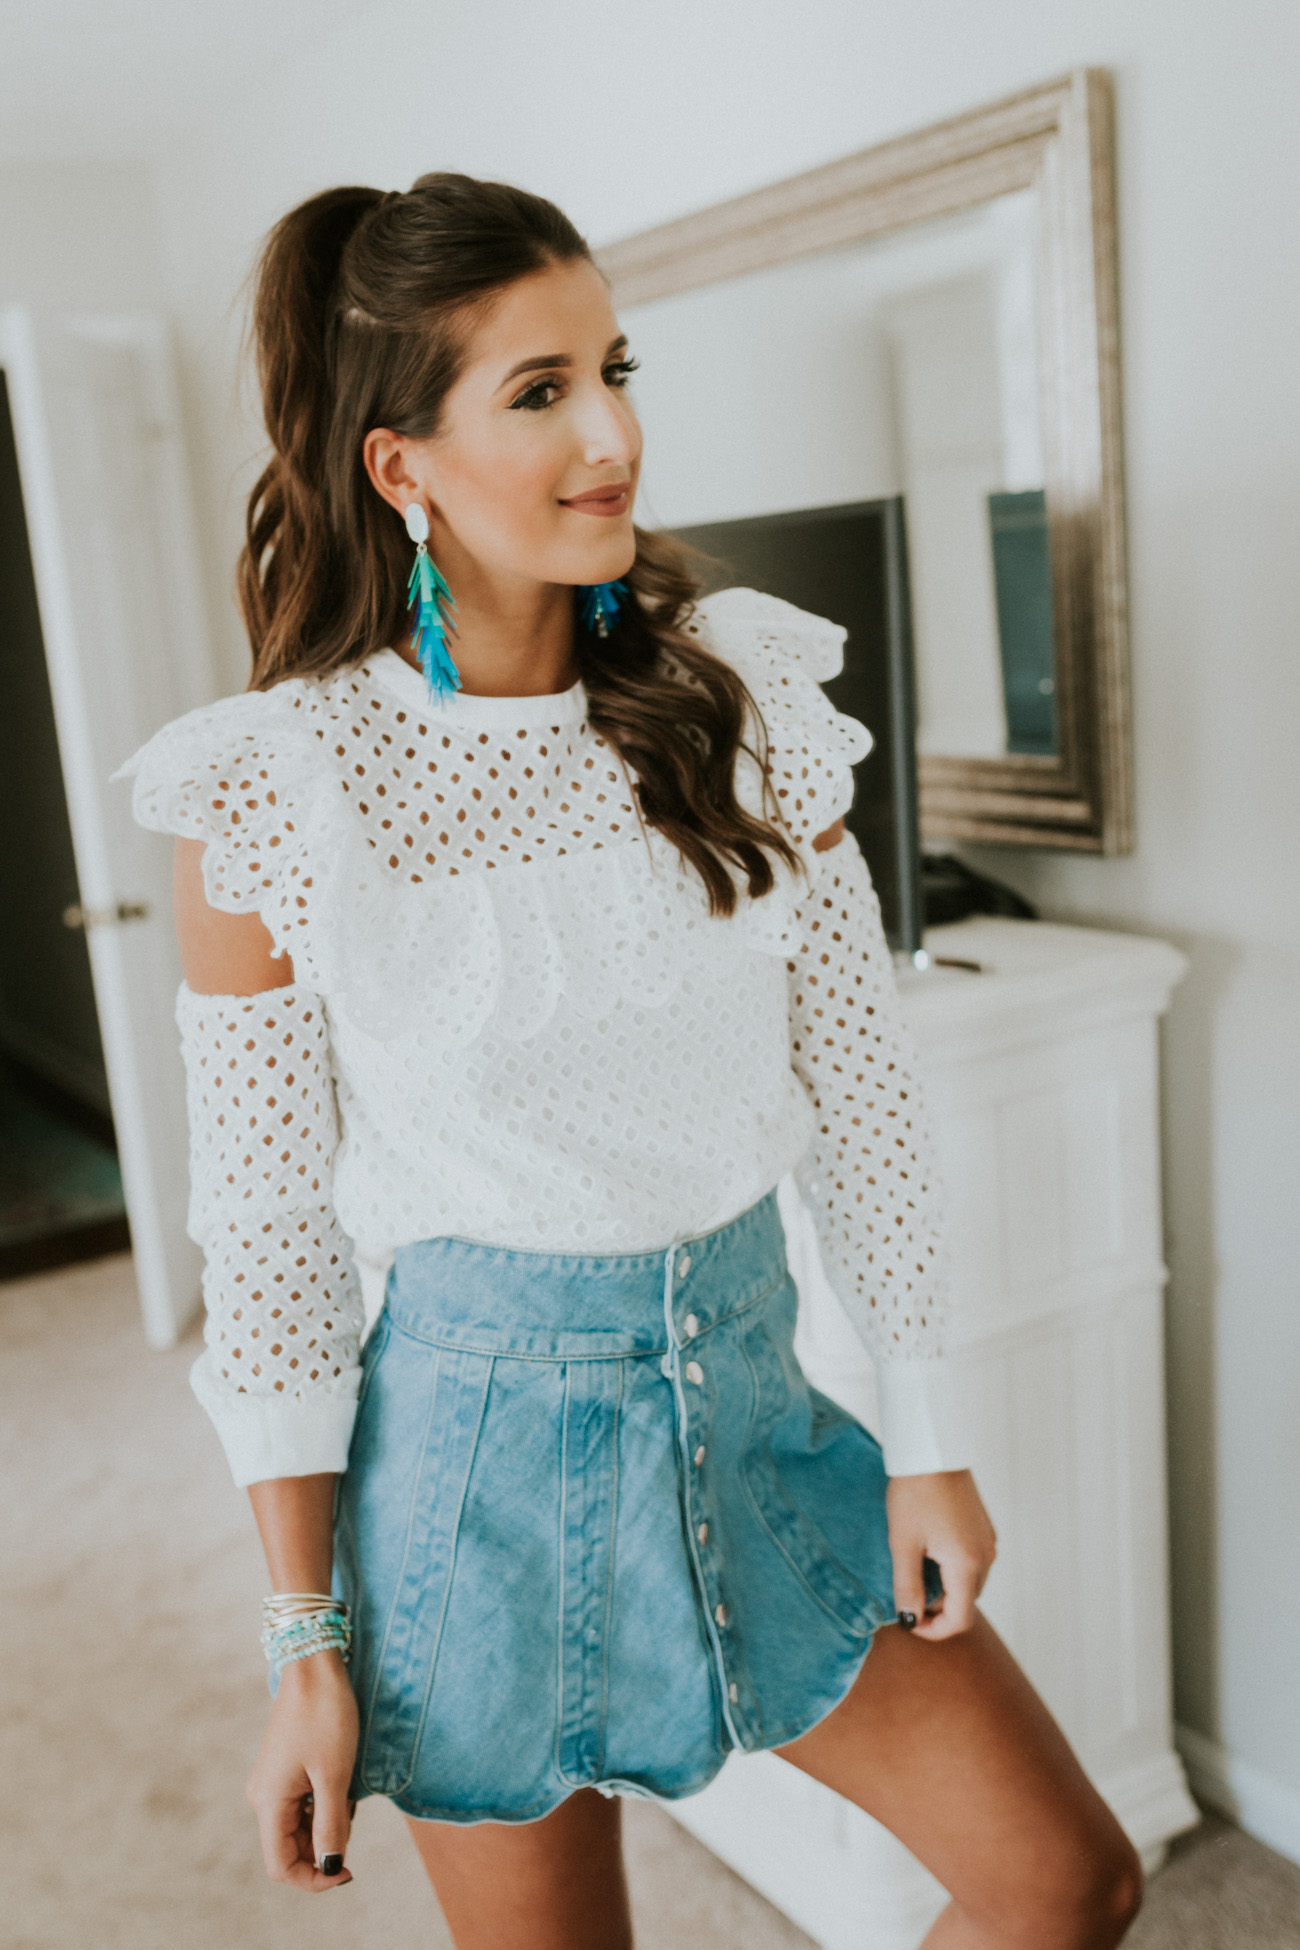 kendra scott spring collection, kendra scott justyne earrings, kendra scott jewelry, kendra scott amazonite earrings, denim skirt, front button skirt, endless rose top, feminine outfit, spring fashion, spring outfit ideas // grace wainwright a southern drawl